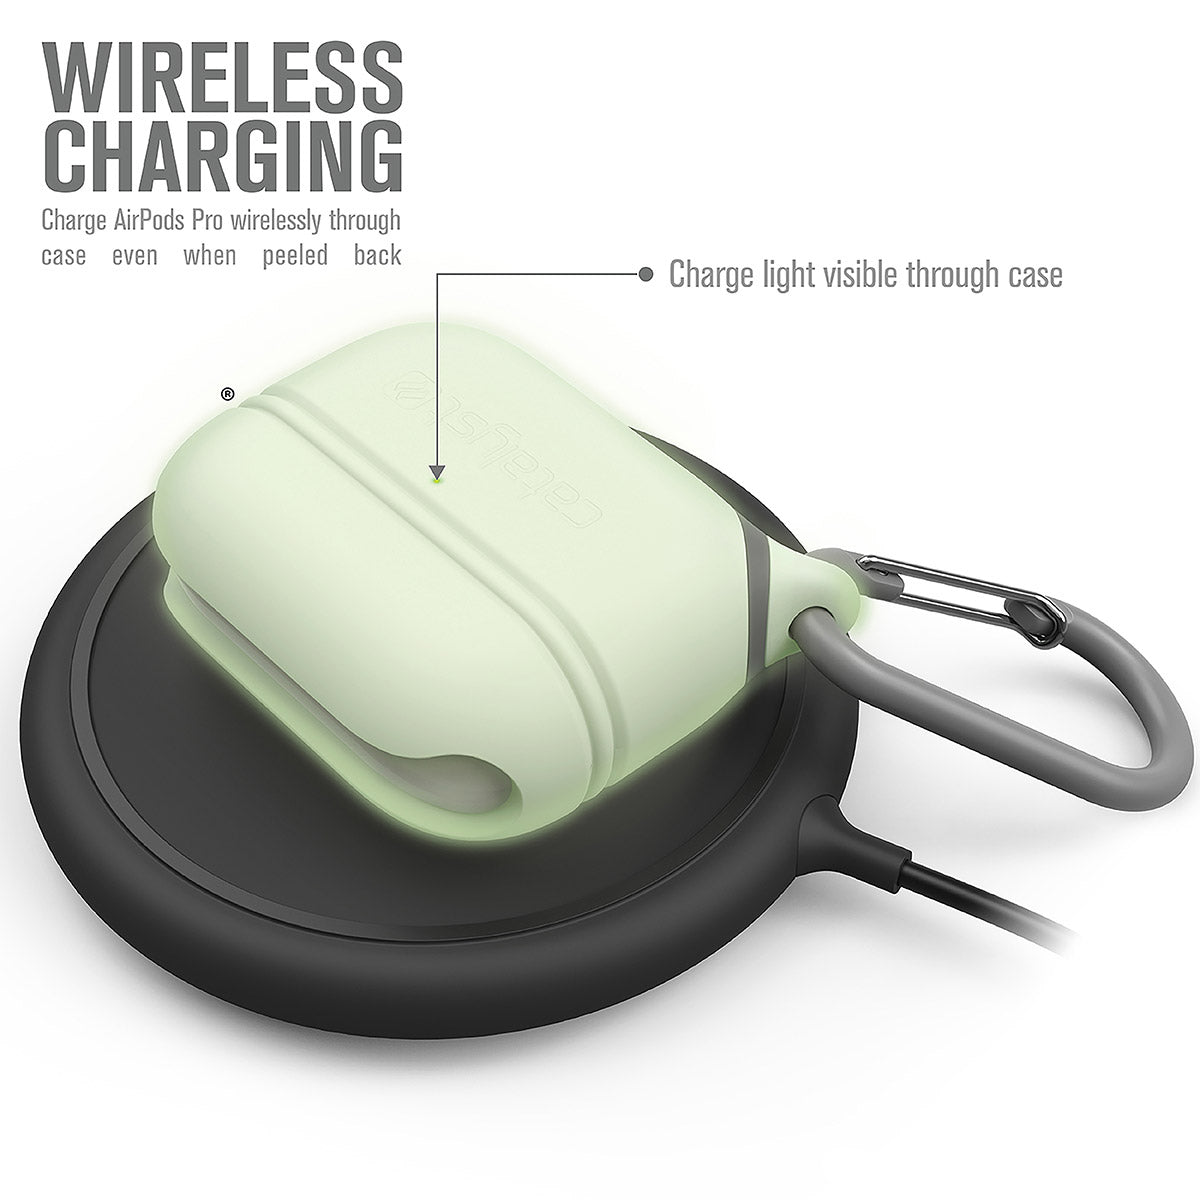 catalyst airpods pro gen 2 1 waterproof case carabiner special edition glow in the dark on top of a wireless charger text reads wireless charging charge airpods pro wirelessly through case even when peeled back charge light visible through case